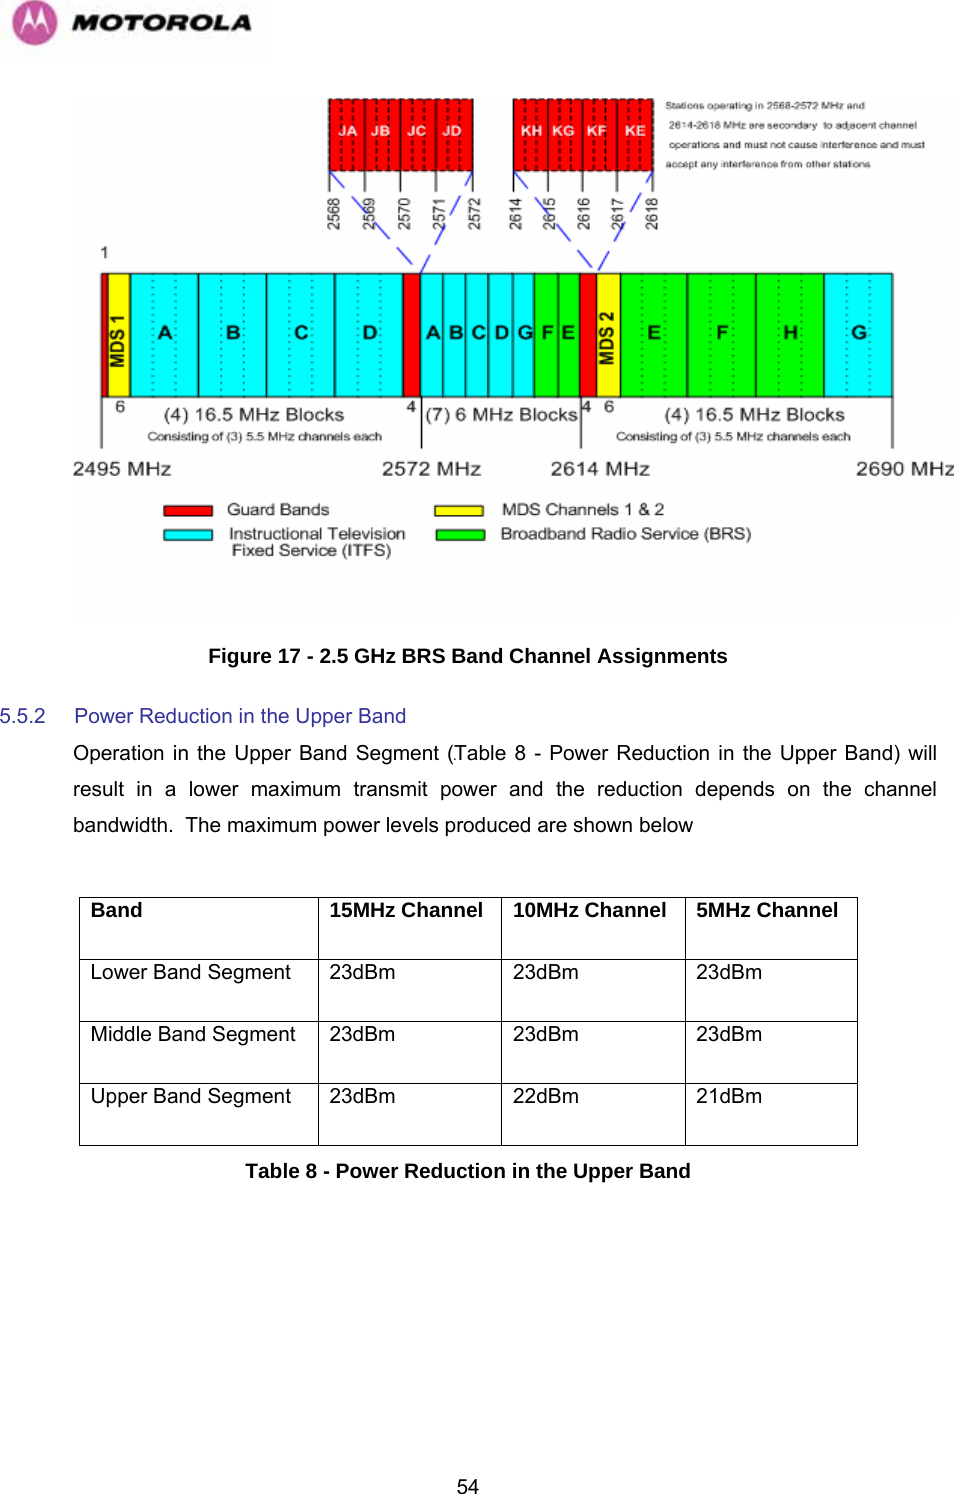   54 Figure 17 - 2.5 GHz BRS Band Channel Assignments 5.5.2  Power Reduction in the Upper Band Operation in the Upper Band Segment (1003HTable 8 - Power Reduction in the Upper Band) will result in a lower maximum transmit power and the reduction depends on the channel bandwidth.  The maximum power levels produced are shown below  Band  15MHz Channel  10MHz Channel  5MHz Channel Lower Band Segment  23dBm  23dBm  23dBm Middle Band Segment  23dBm  23dBm  23dBm Upper Band Segment  23dBm  22dBm  21dBm Table 8 - Power Reduction in the Upper Band 